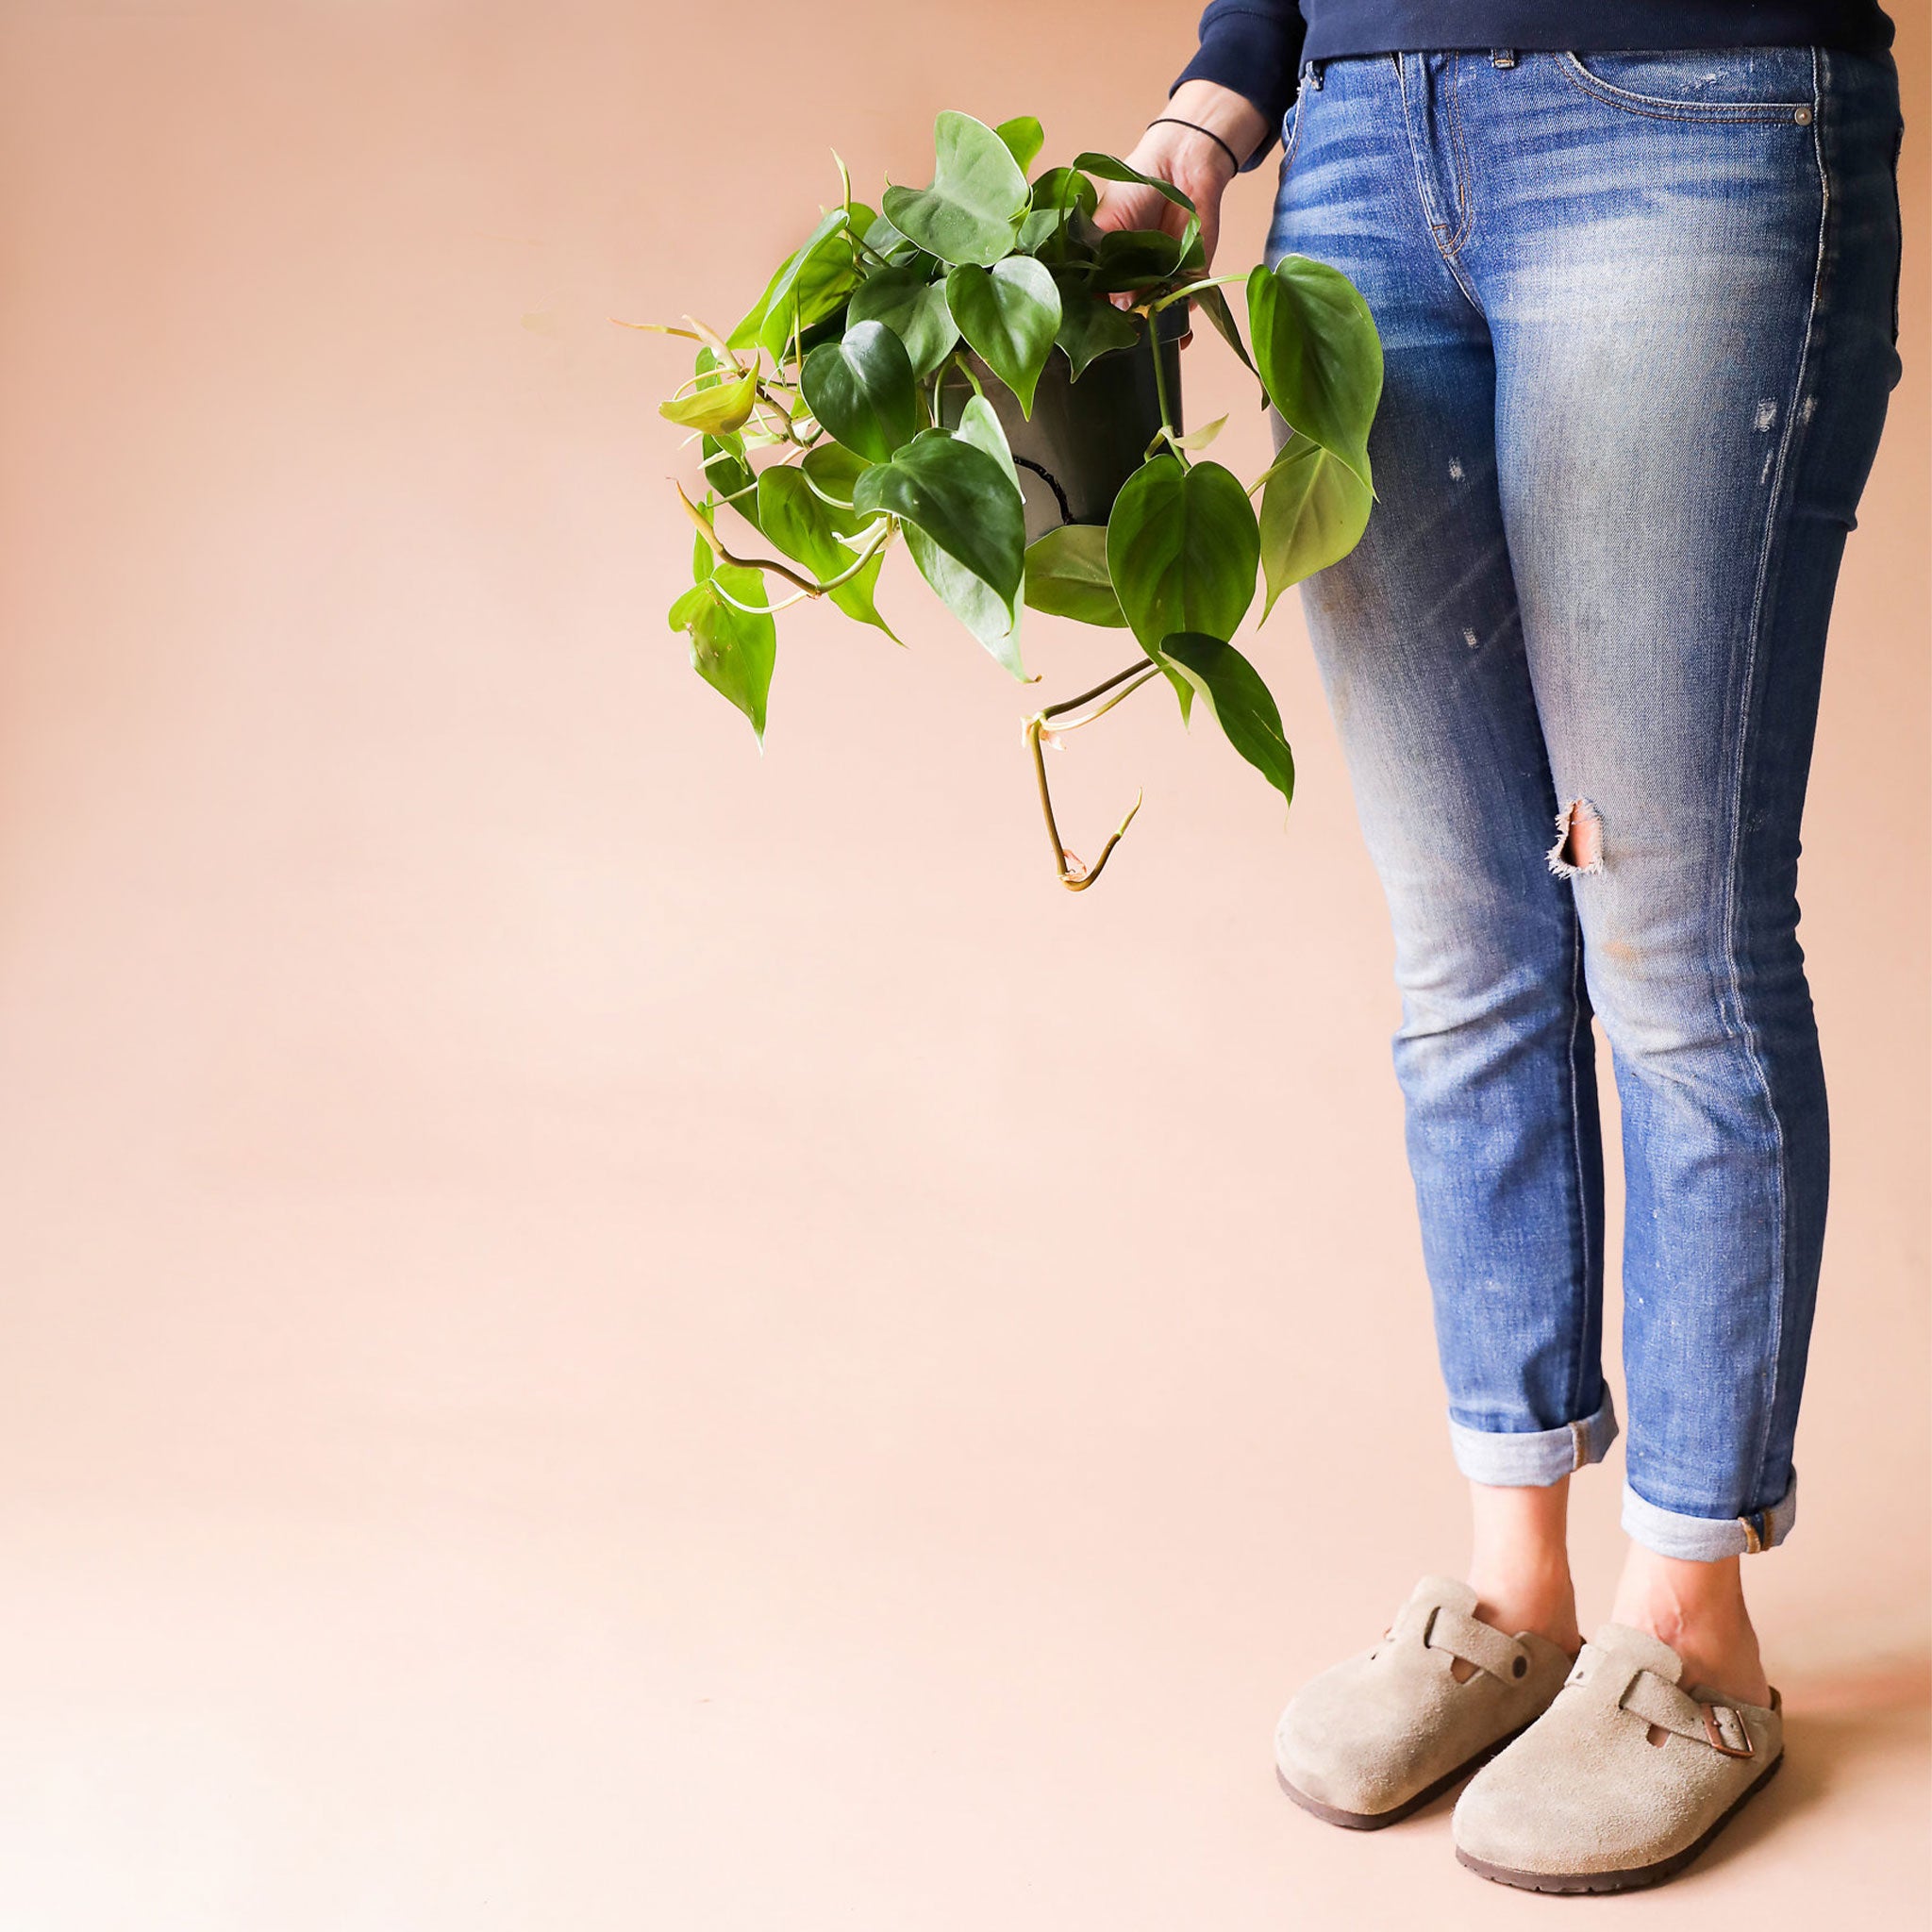 In front of a peachy background is a person standing on the right side of the picture. The person is wearing light blue jeans. In their right hand is a dark green circular pot with a philodendron cordatum inside. The green vines spill out over the sides of the pot. The green leaves are wide with a pointed top.